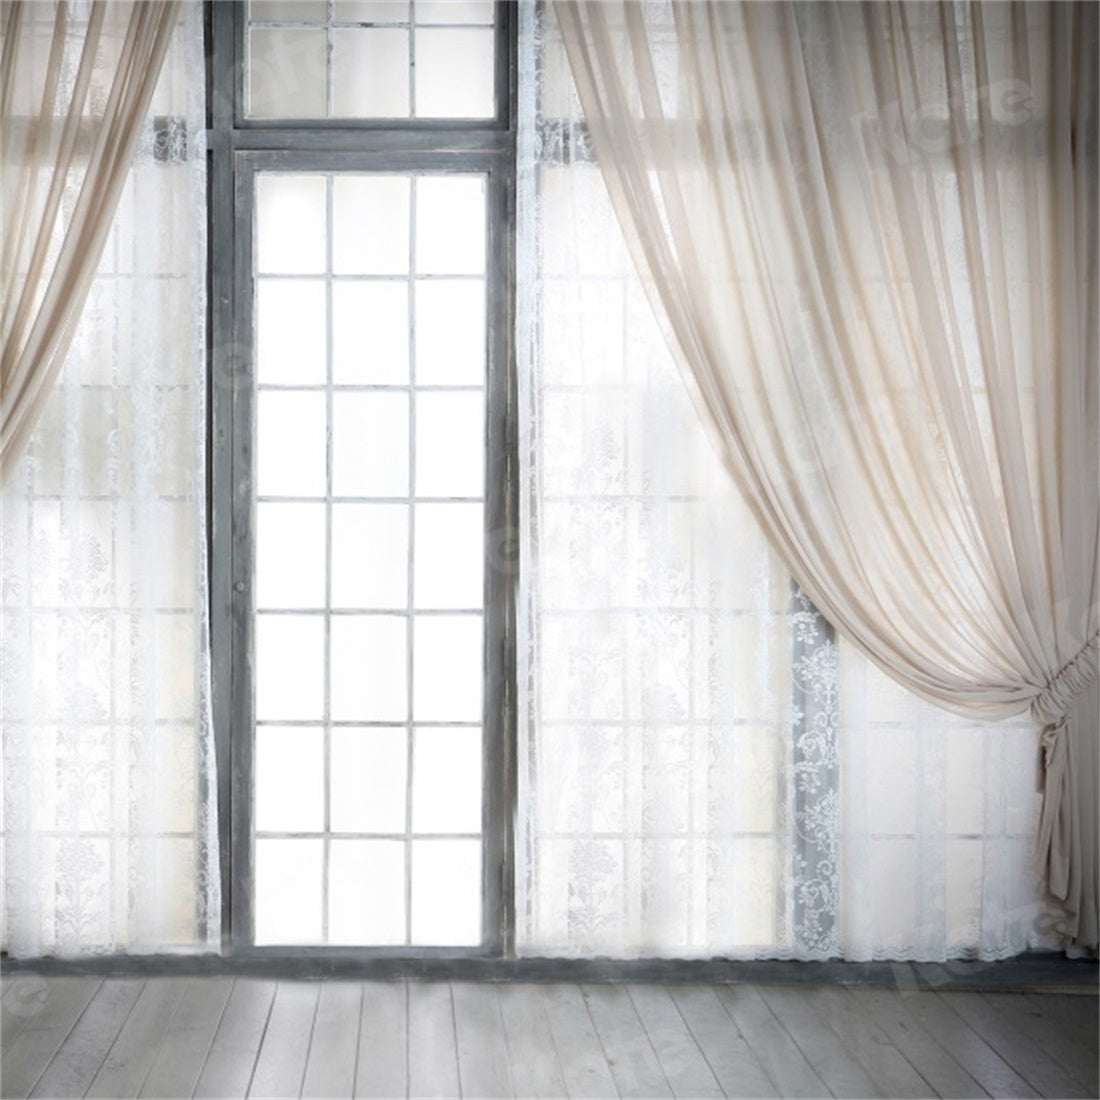 Kate Window indoor with White Curtain Backdrop